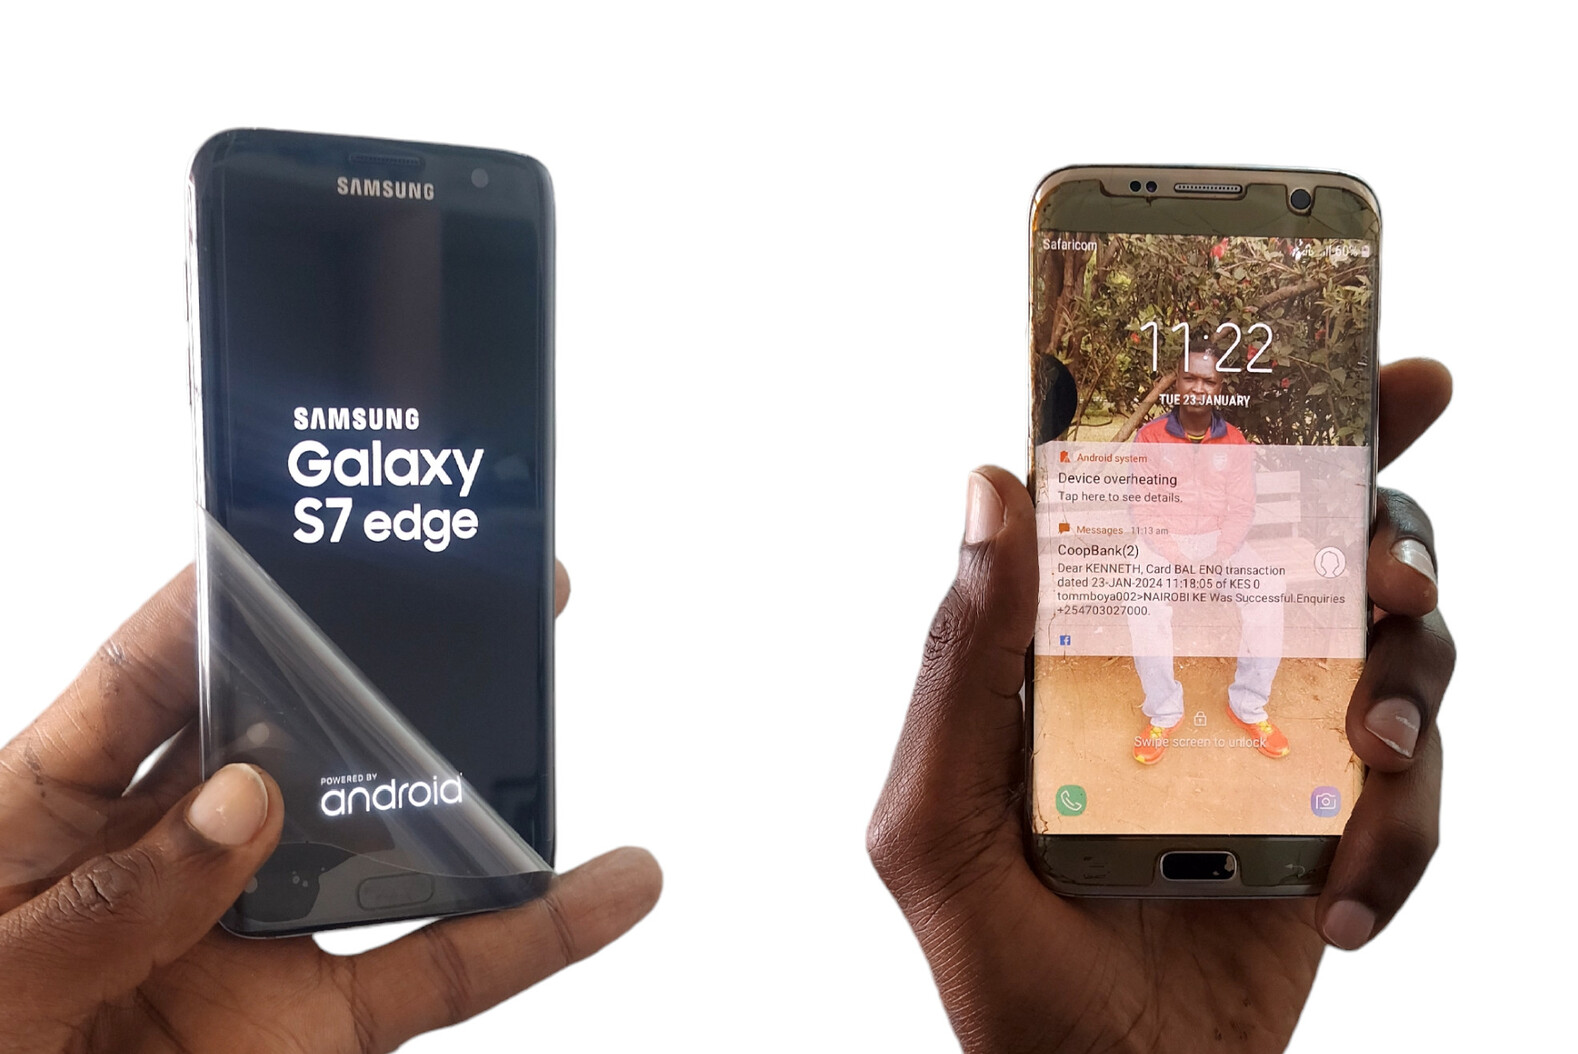 galaxy s7 edge before and after screen replacemenet at techbay electronics kenya.jpg